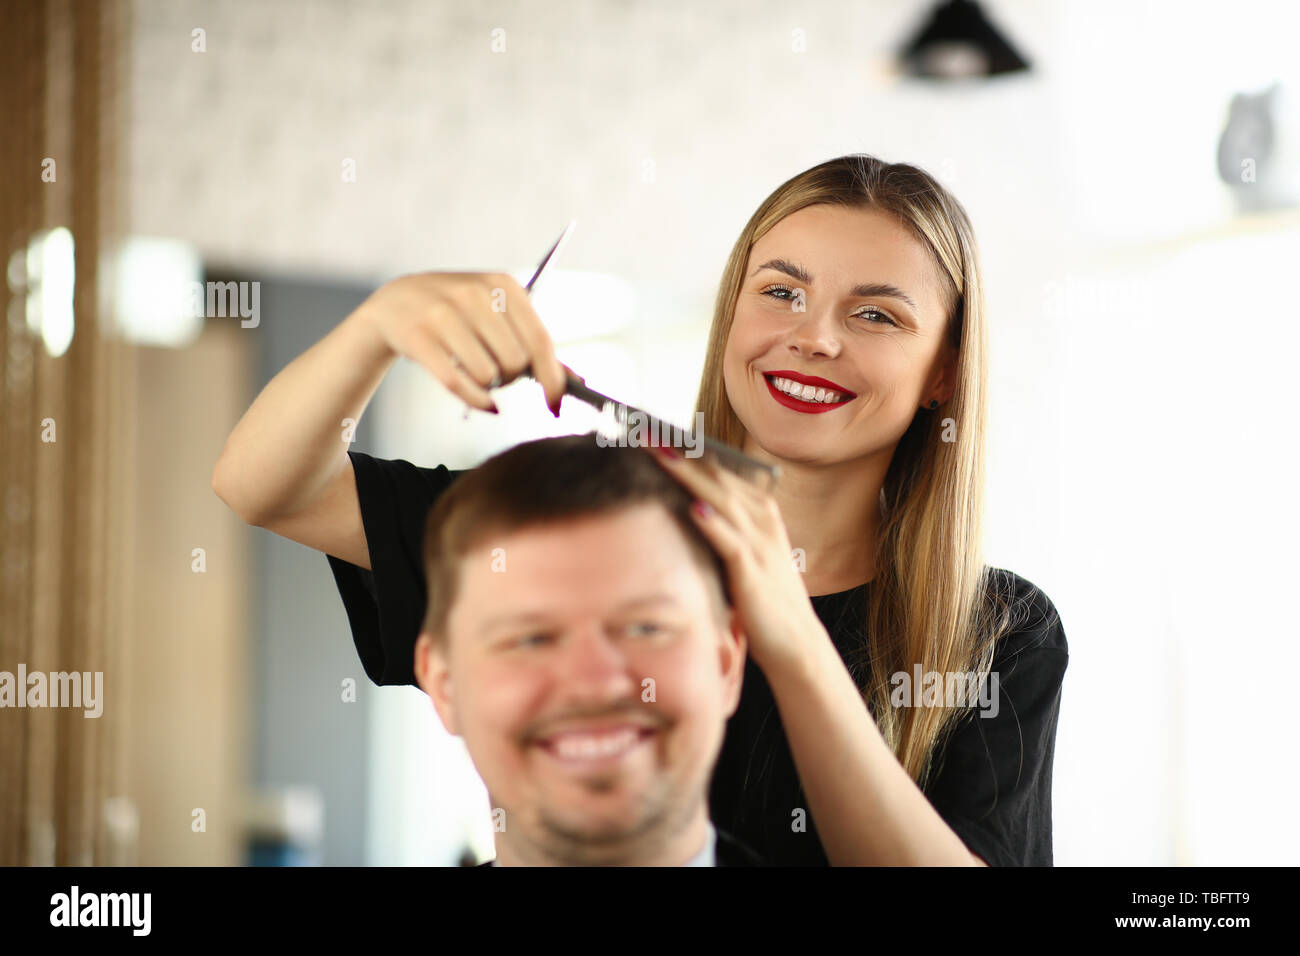 Smiling Hairdresser Combing Hair Of Male Client Woman Hairstylist